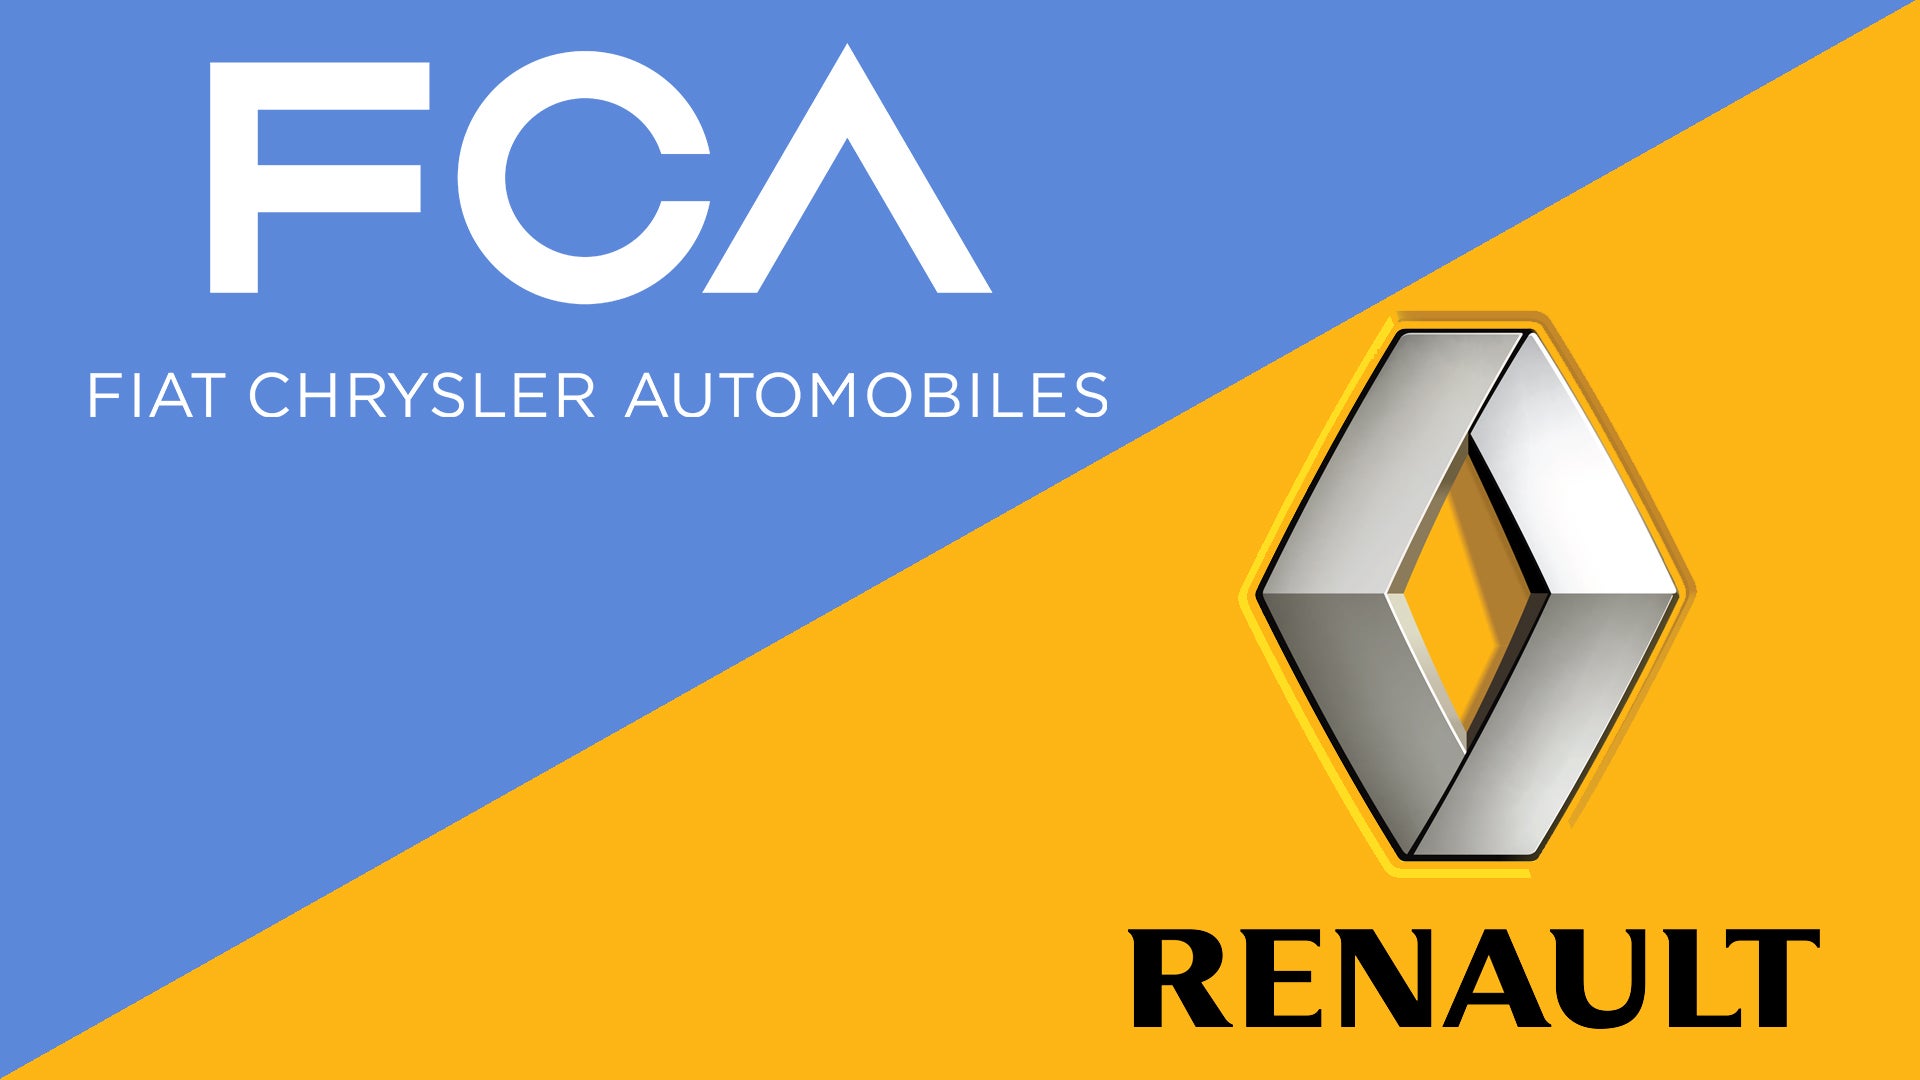 FCA Withdraws Renault Merger Offer, Blames French Government for Stalling Deal